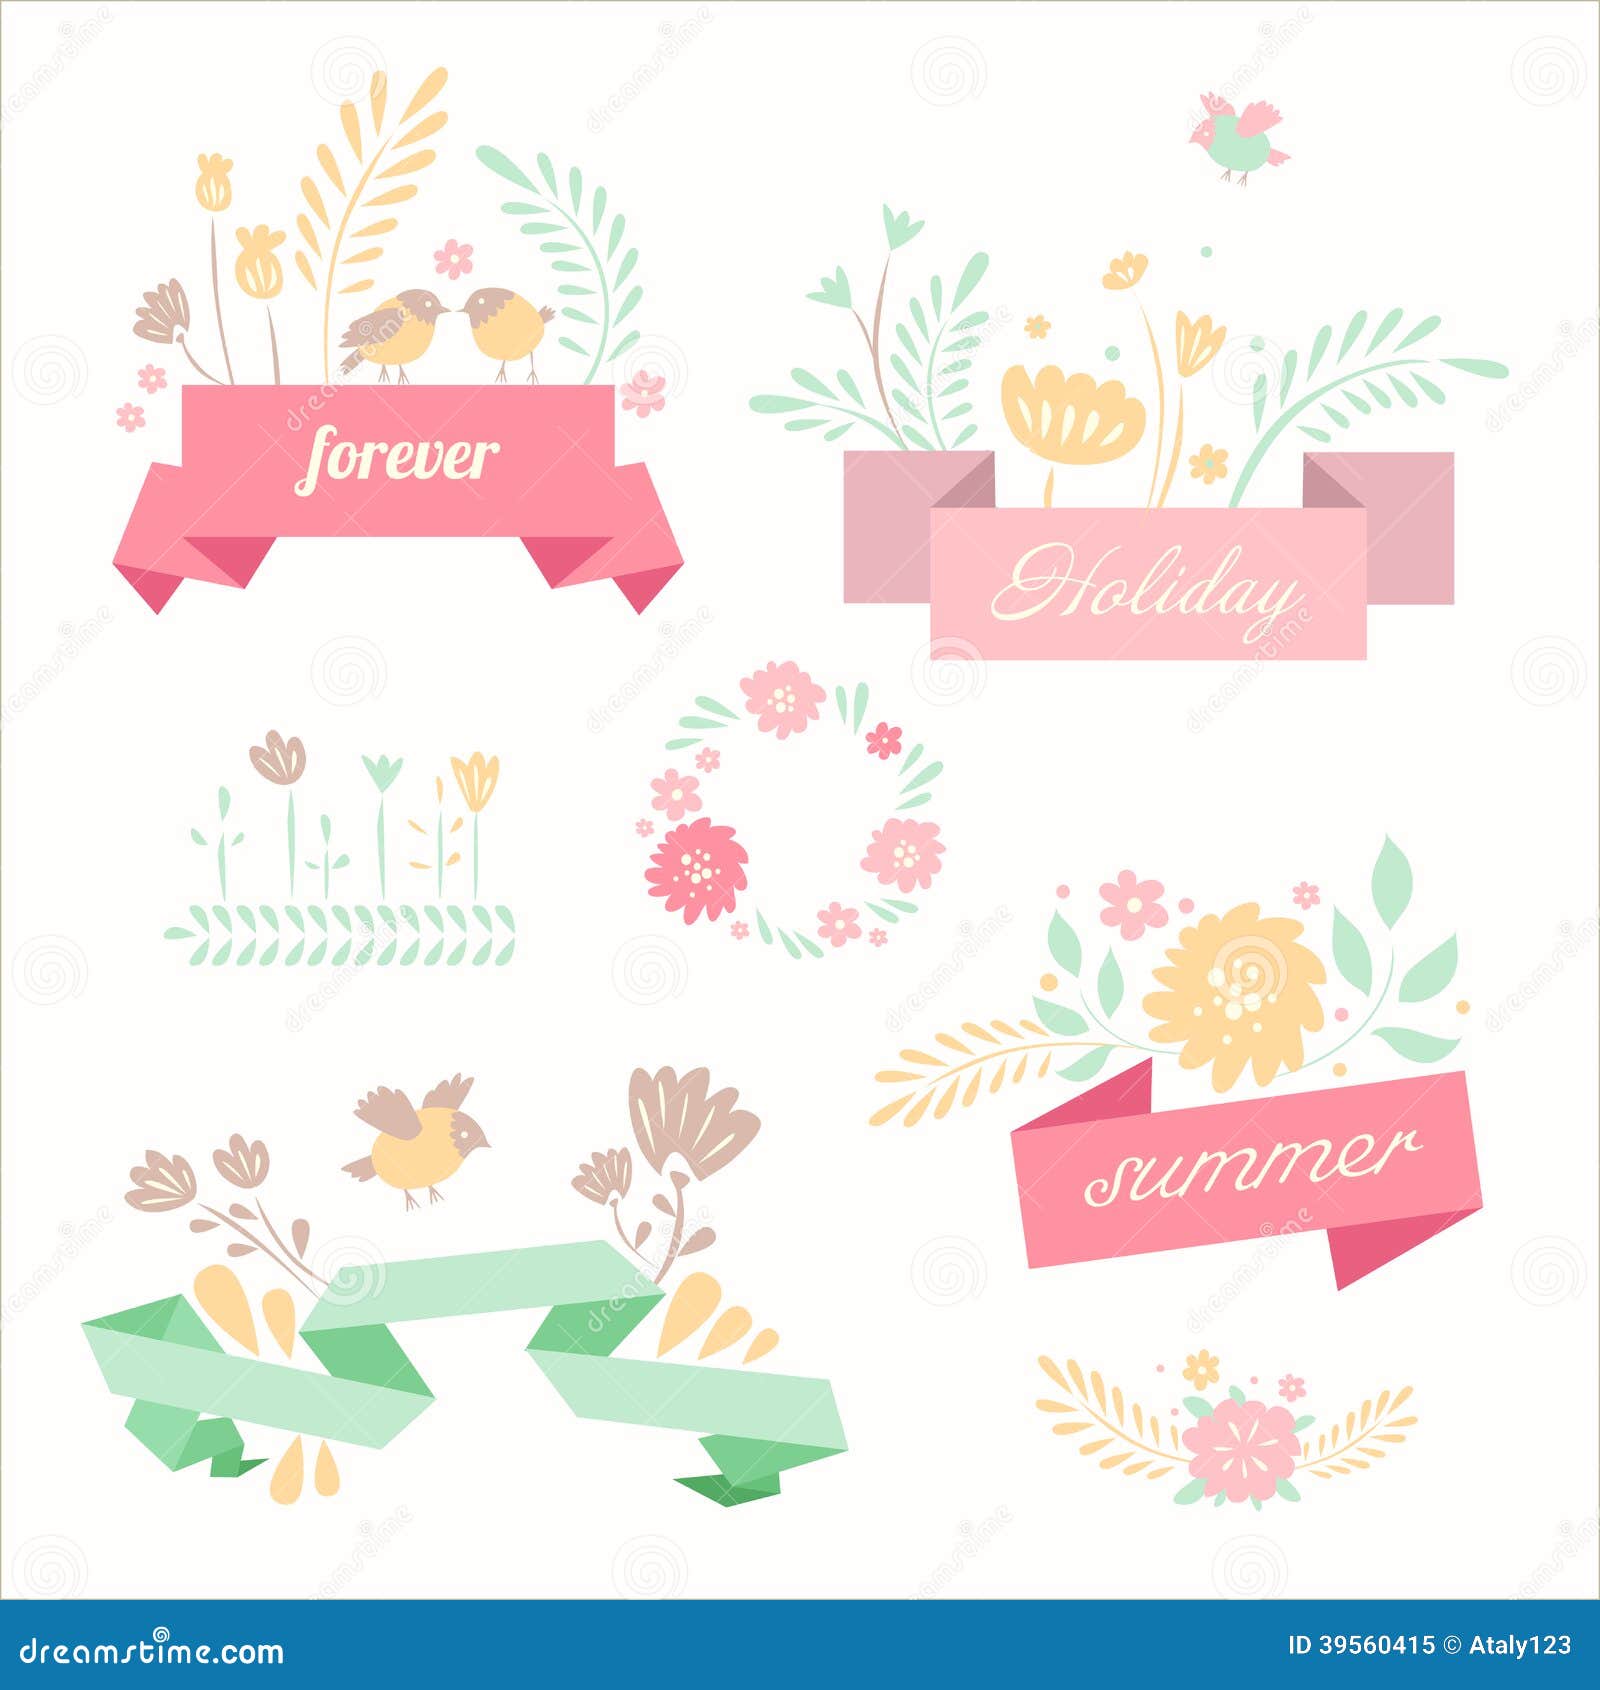 vector ribbon banners retro style summer naive cute hand painted floral pictures decorative set invitations 39560415